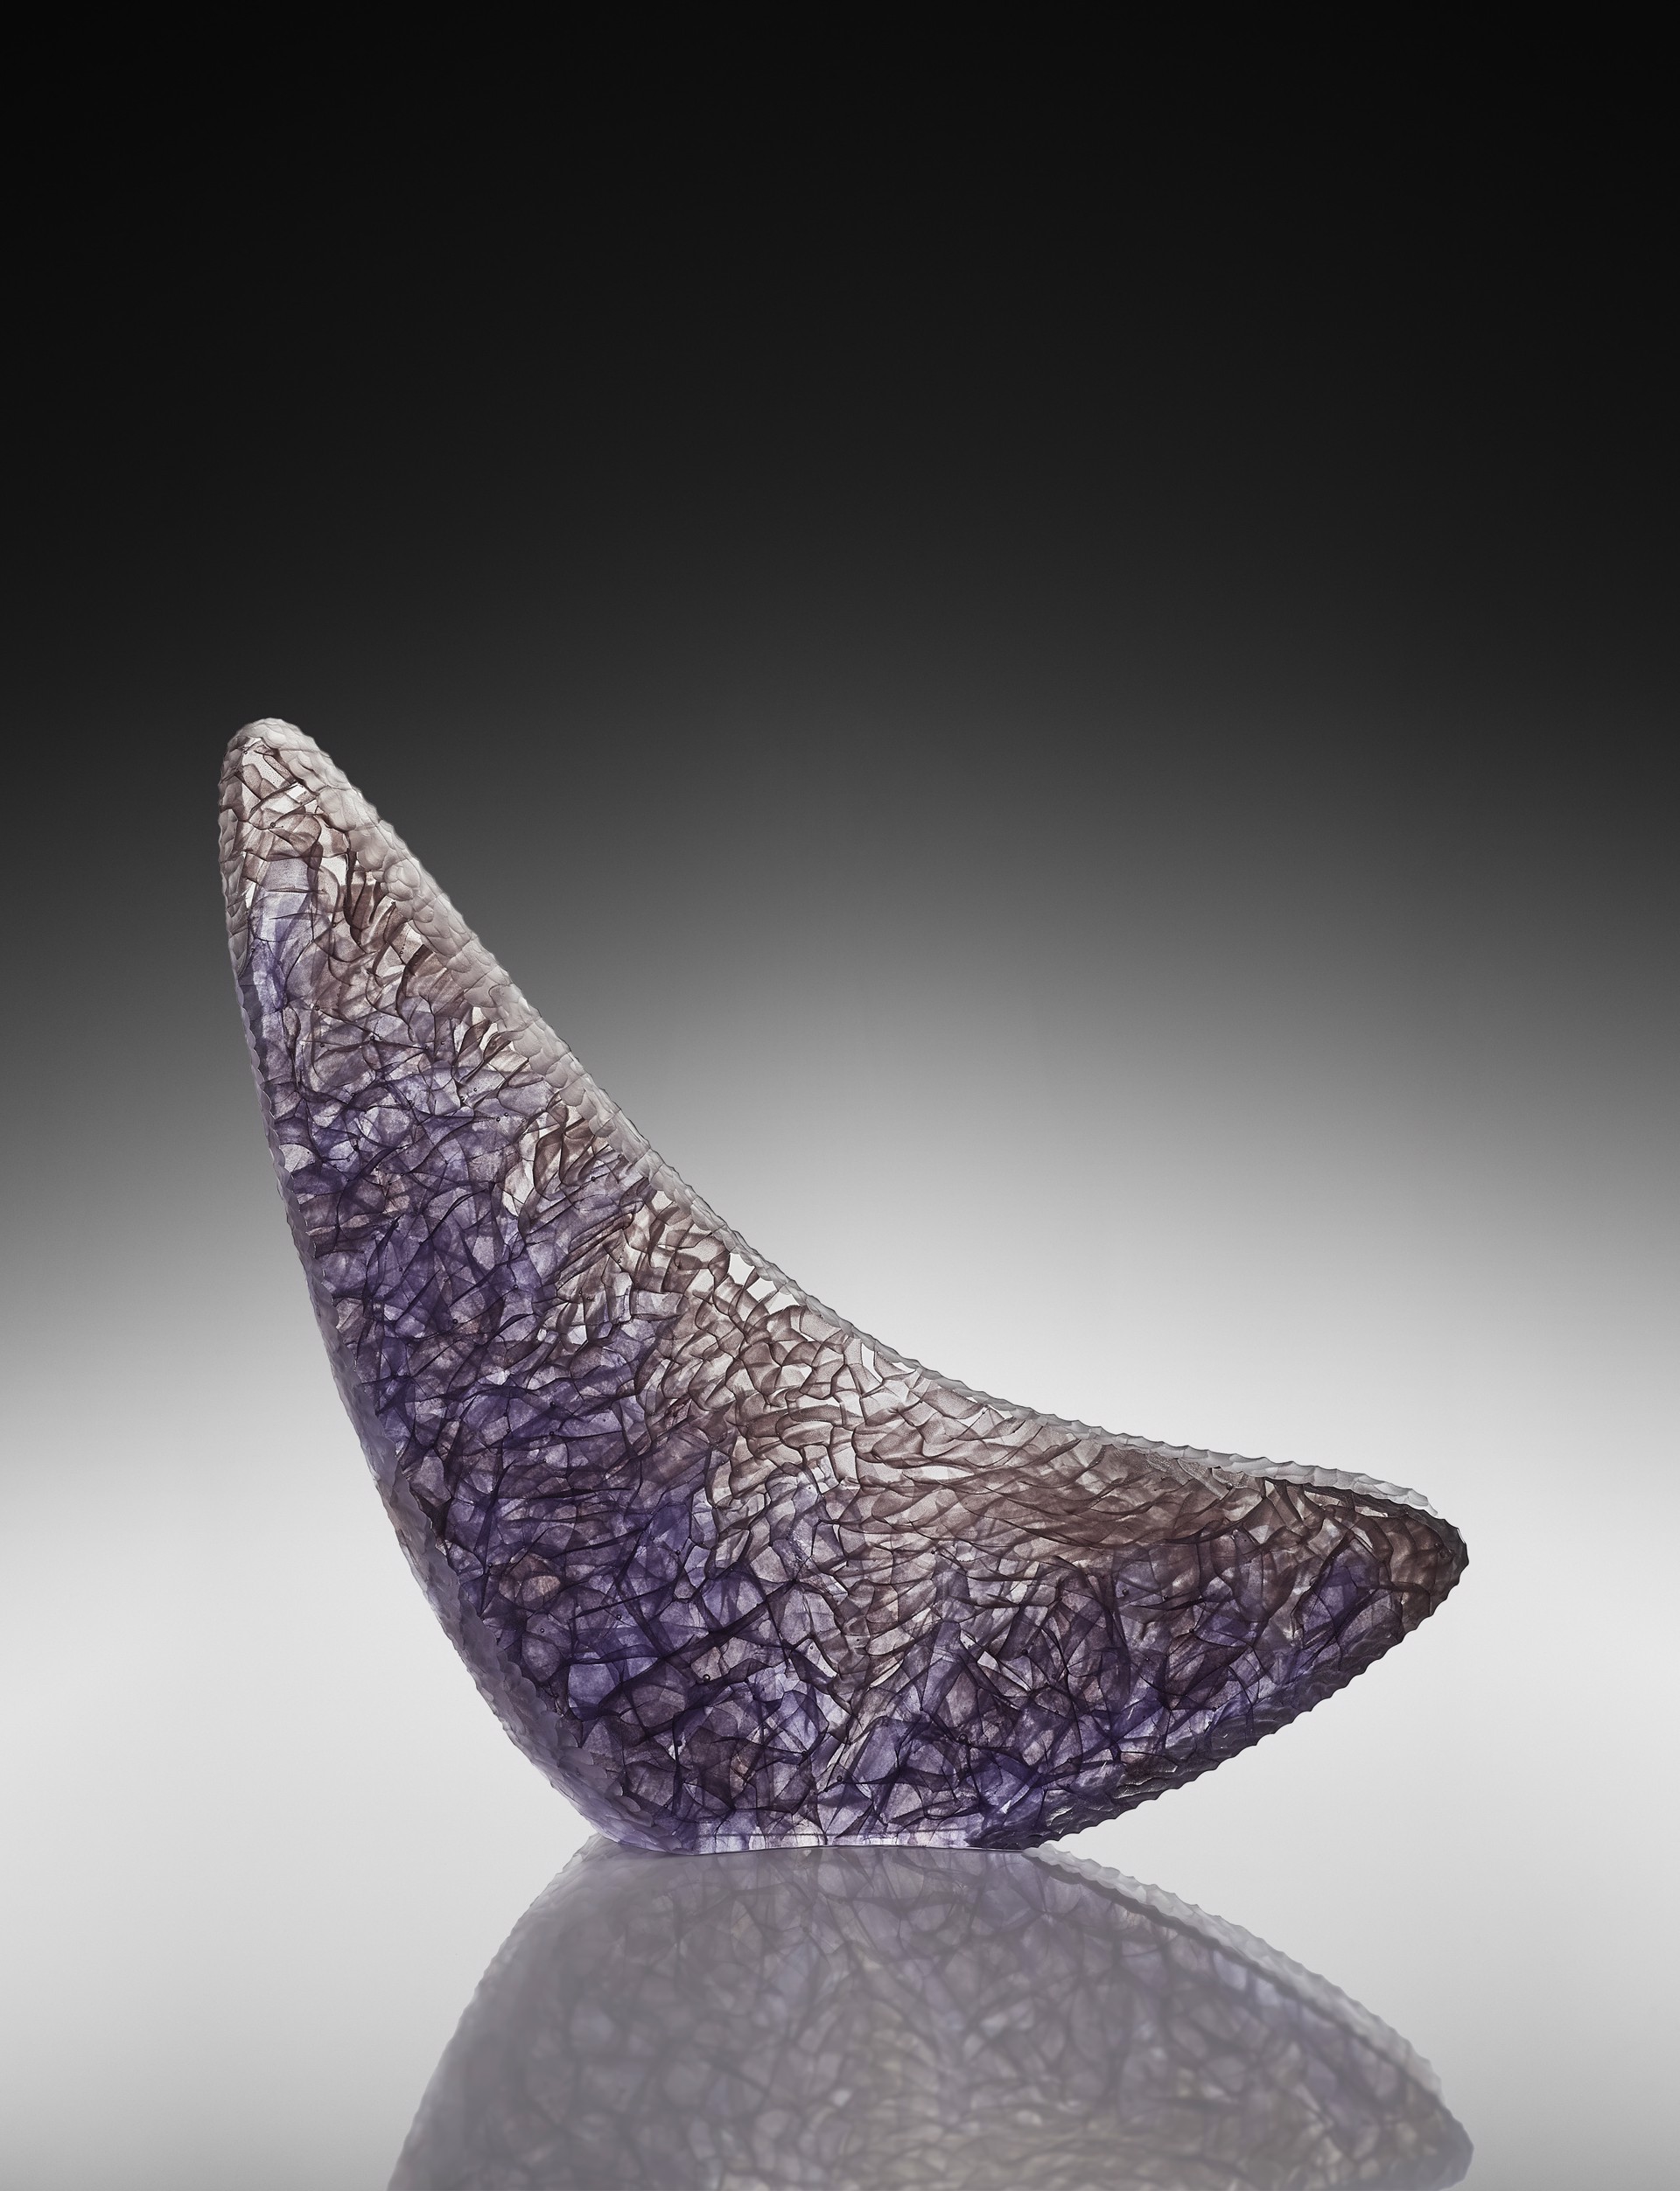 Seaforms 56-12 by Michael Behrens